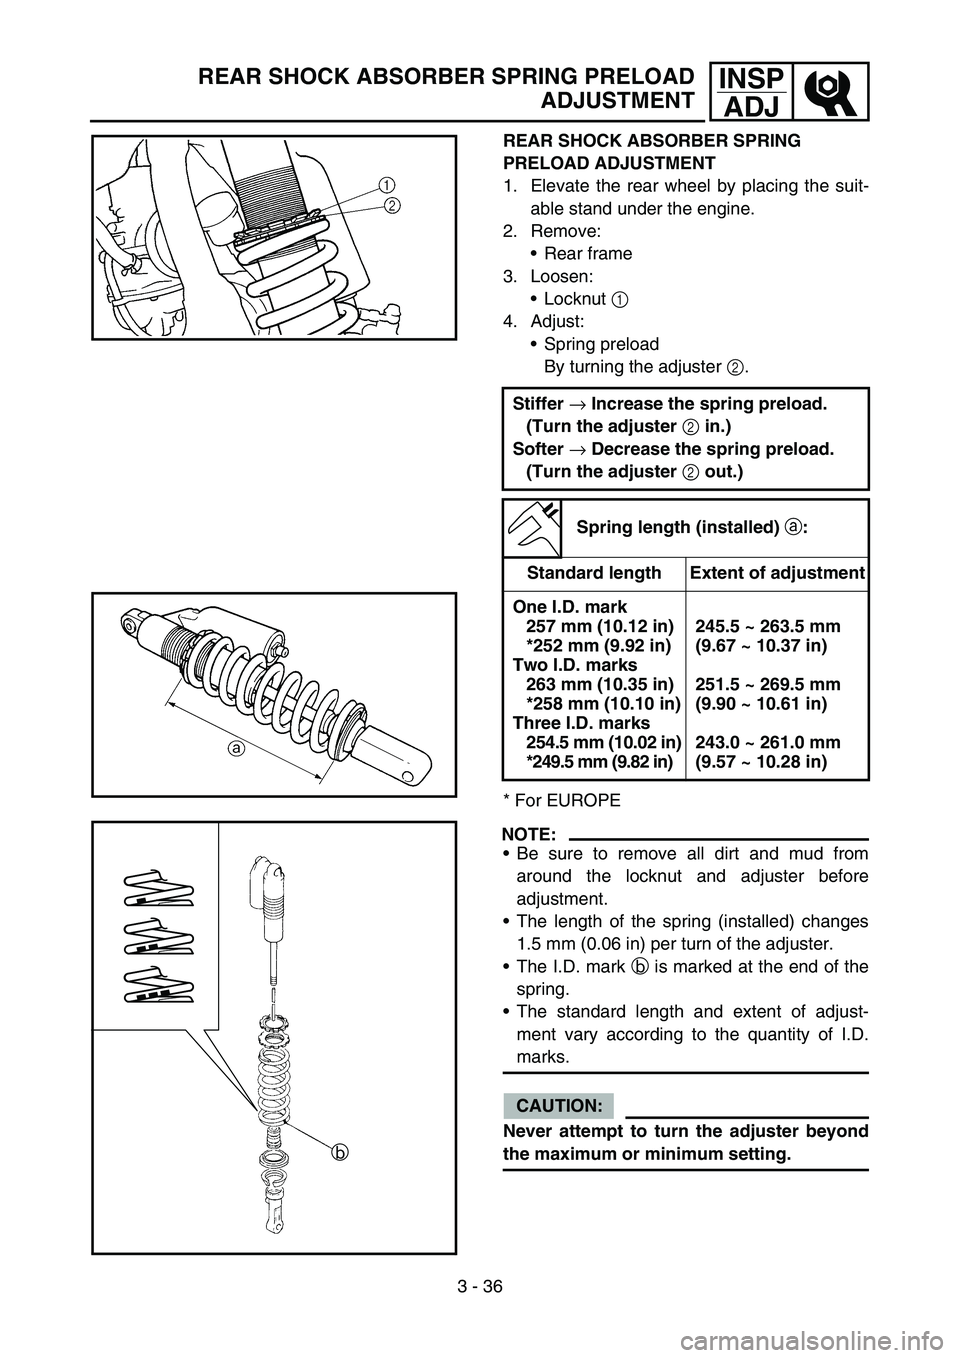 YAMAHA YZ250F 2007  Betriebsanleitungen (in German) 3 - 36
INSP
ADJREAR SHOCK ABSORBER SPRING PRELOAD
ADJUSTMENT
REAR SHOCK ABSORBER SPRING 
PRELOAD ADJUSTMENT
1. Elevate the rear wheel by placing the suit-
able stand under the engine.
2. Remove:
Rear